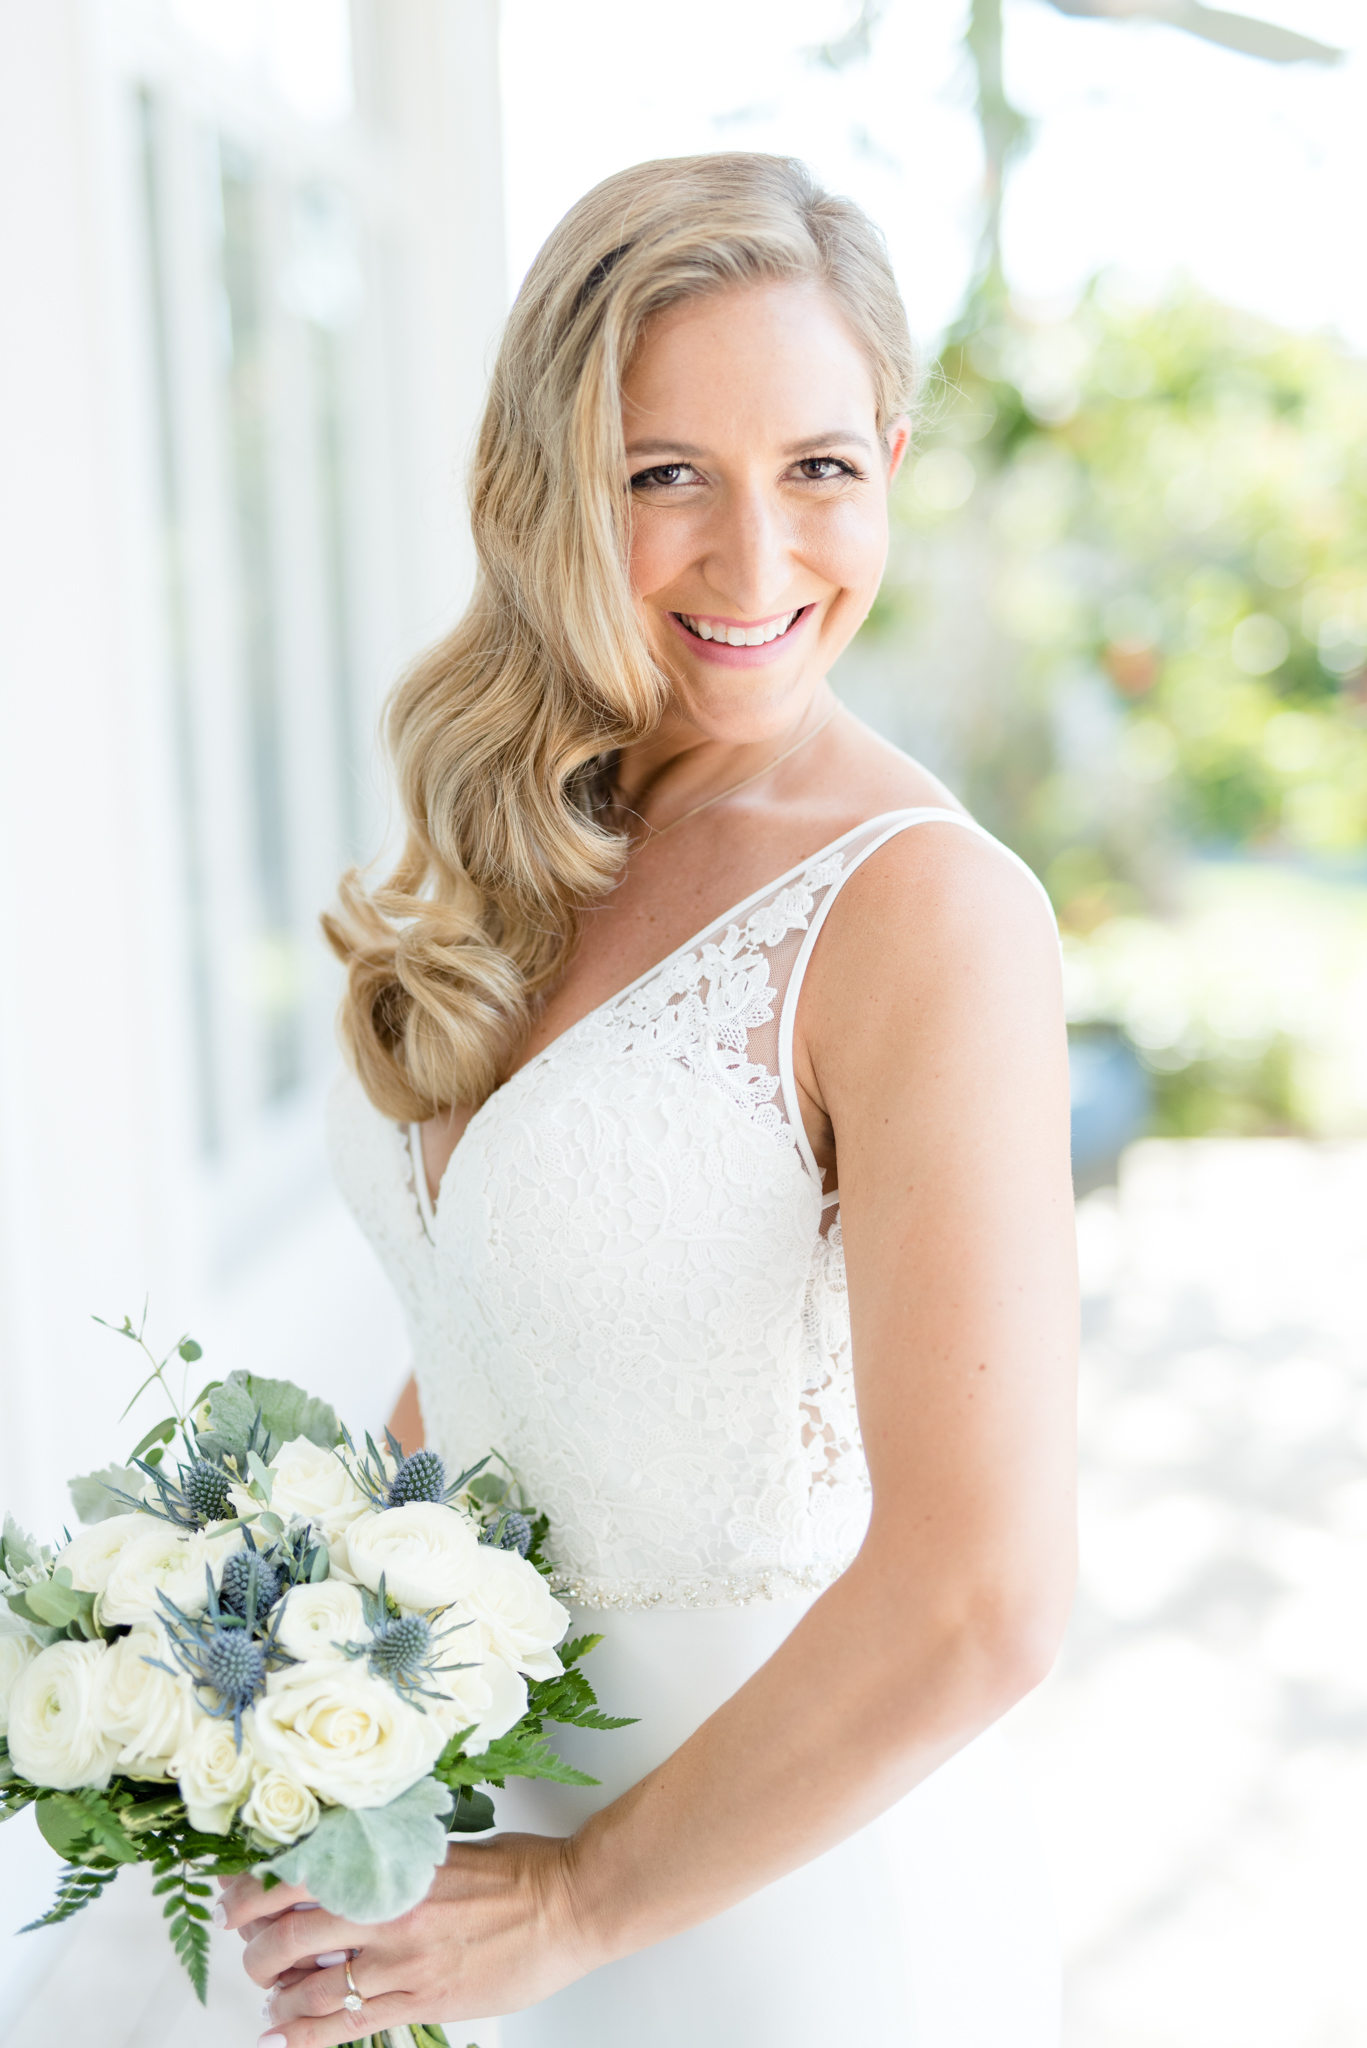 Bride holds flowers and smiles at camera.